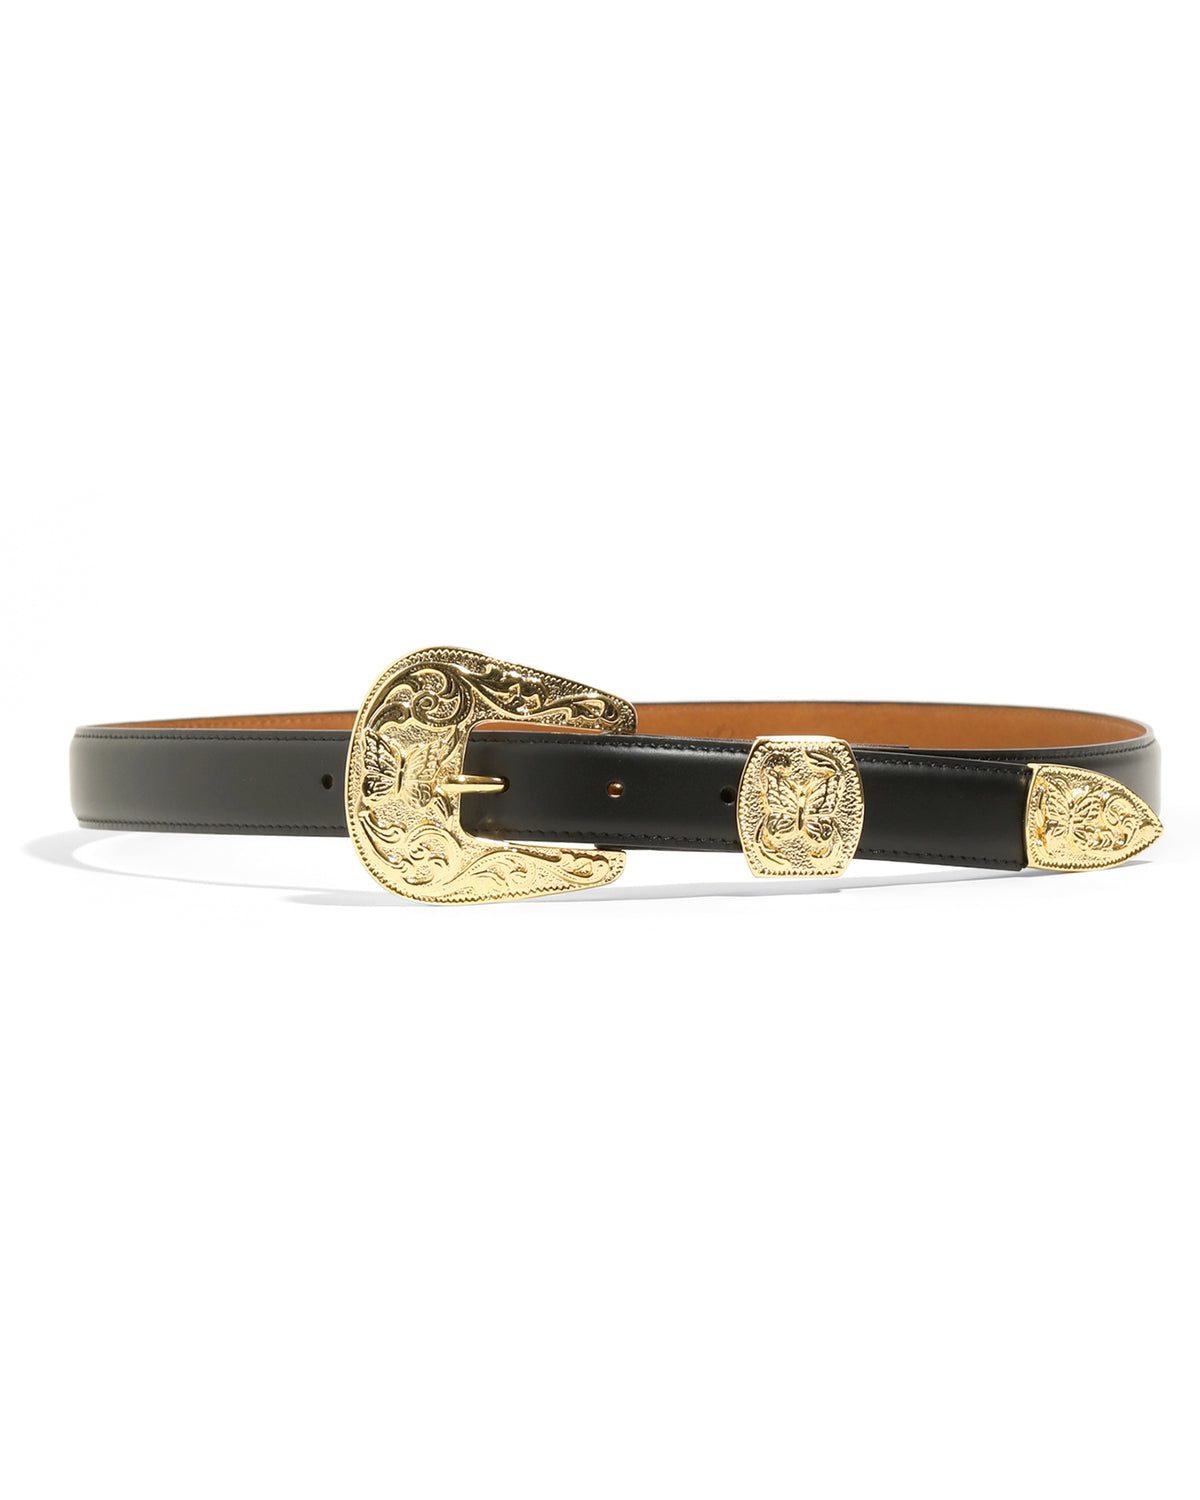 Papillon Western Tip Belt - Steer Leather - Black | Nepenthes New York